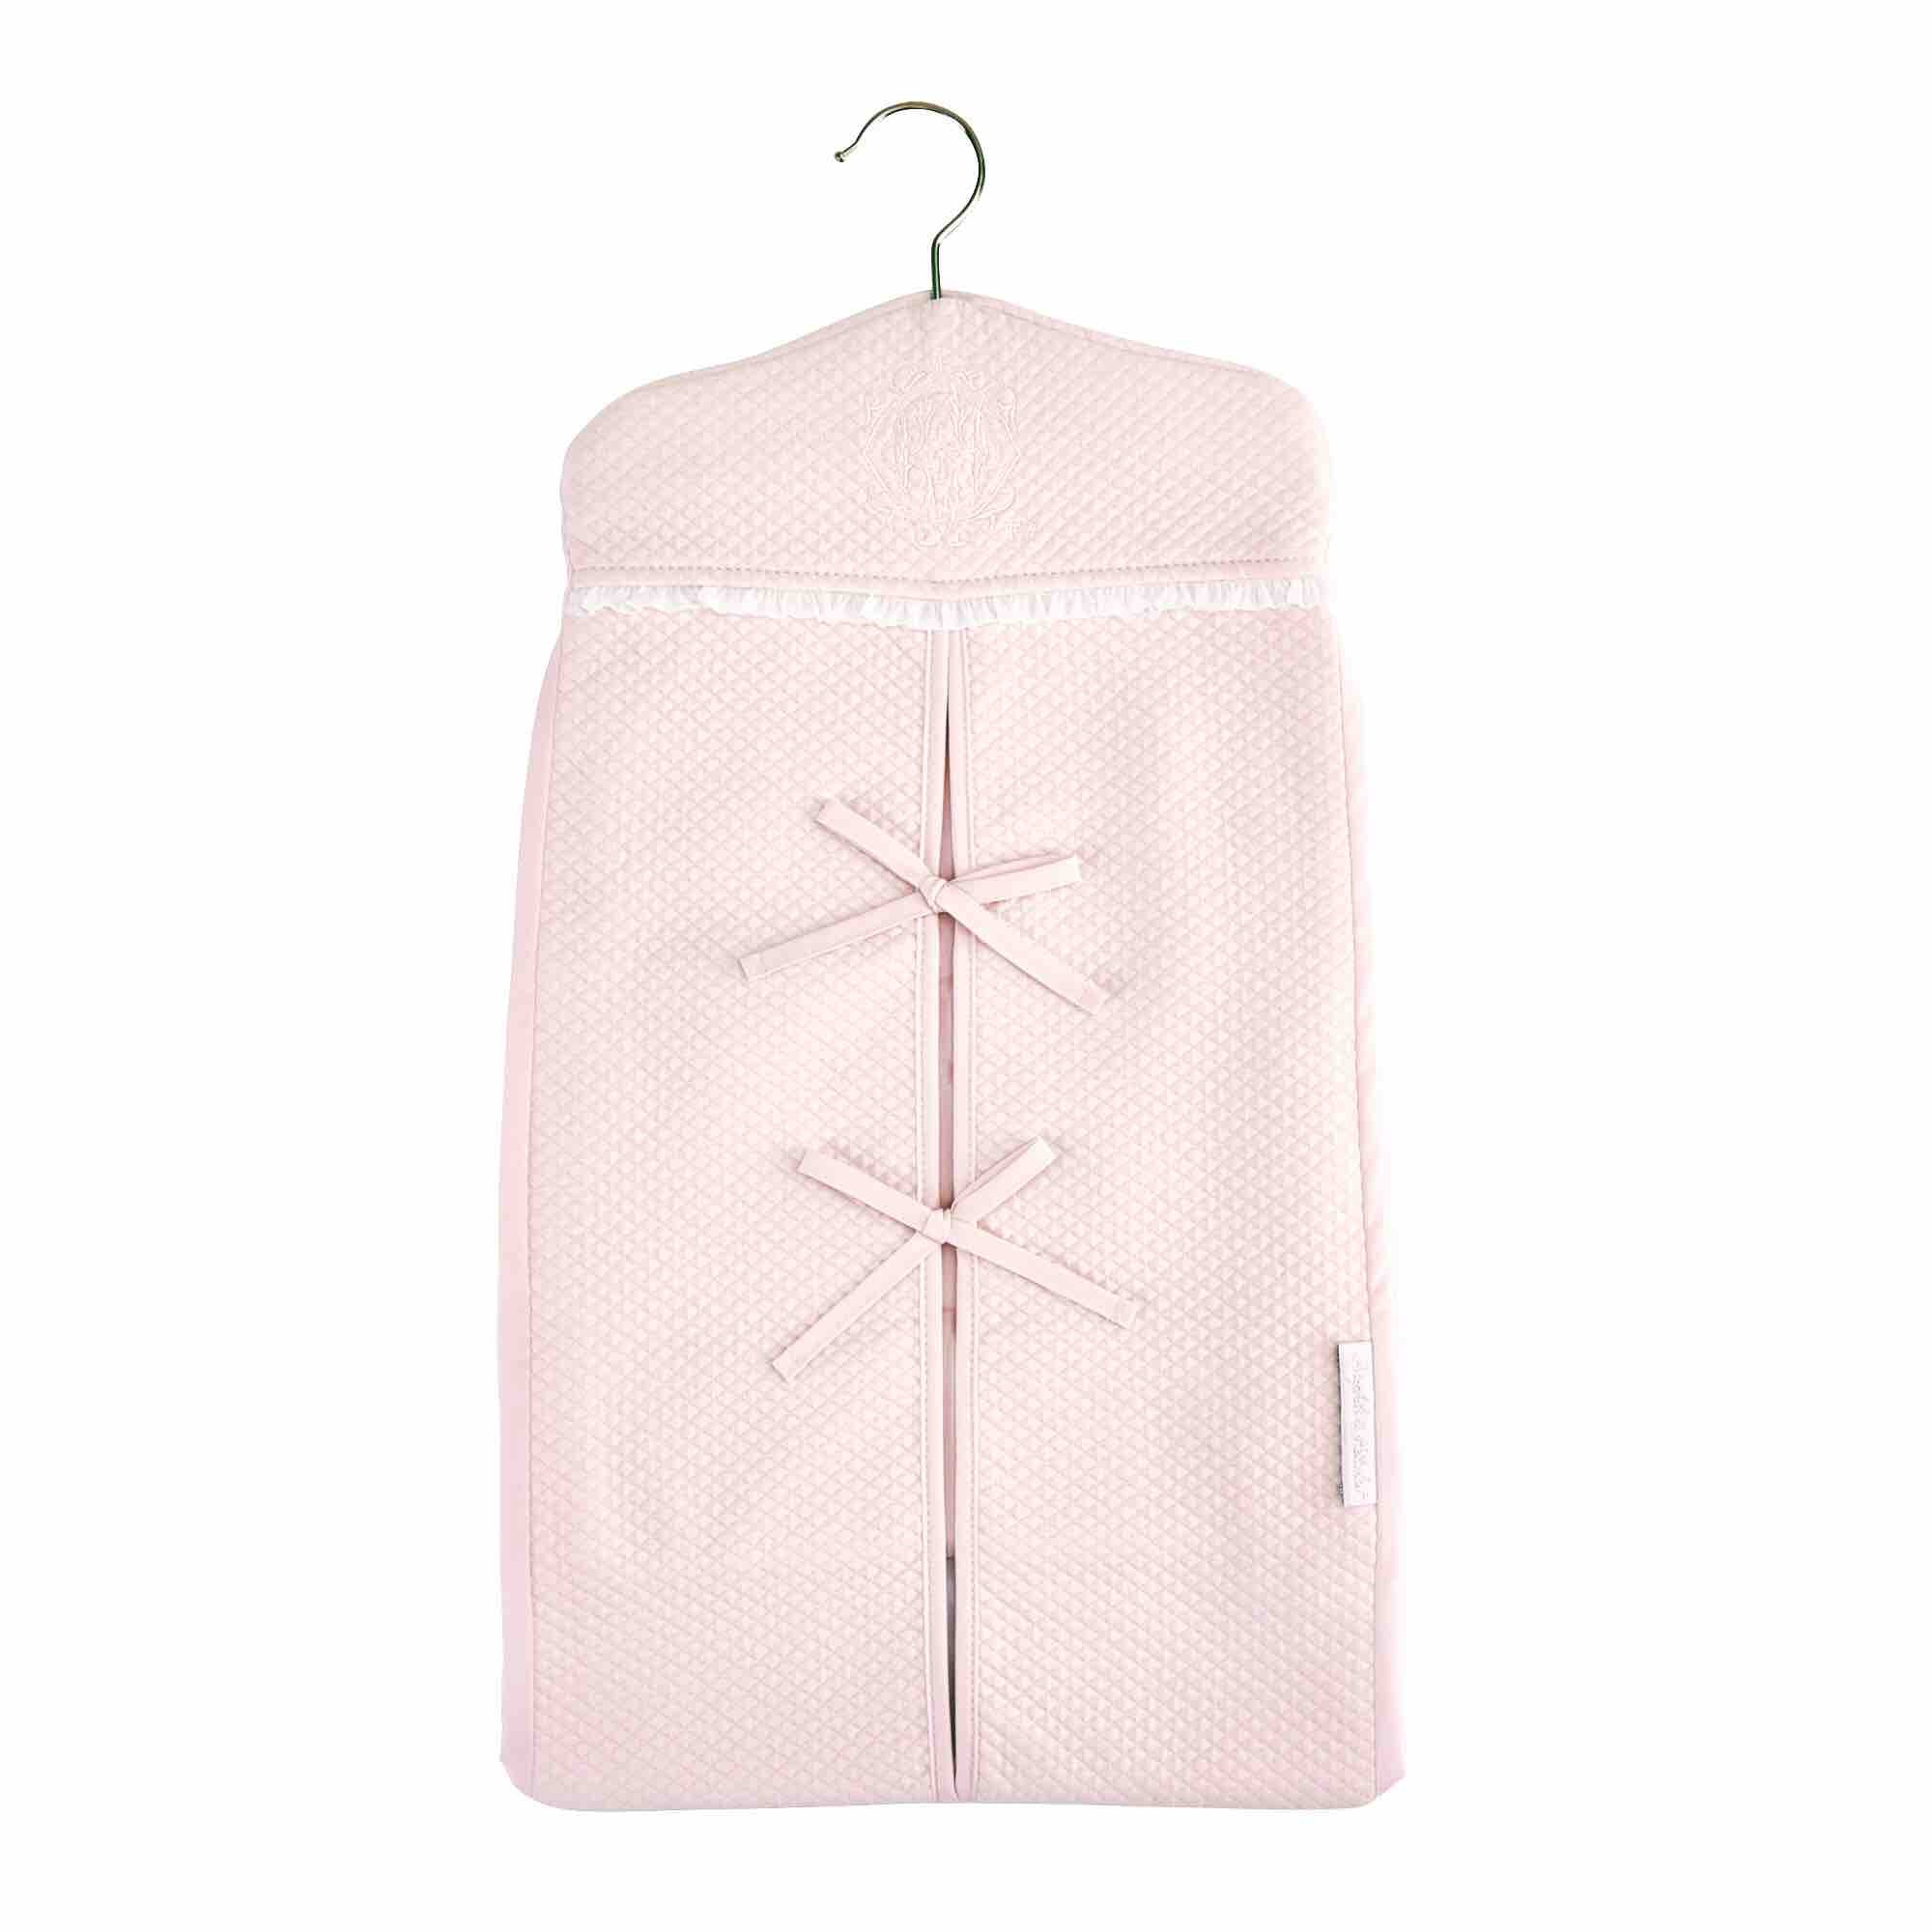 Theophile & Patachou Nappy Stacker - Royal Pink